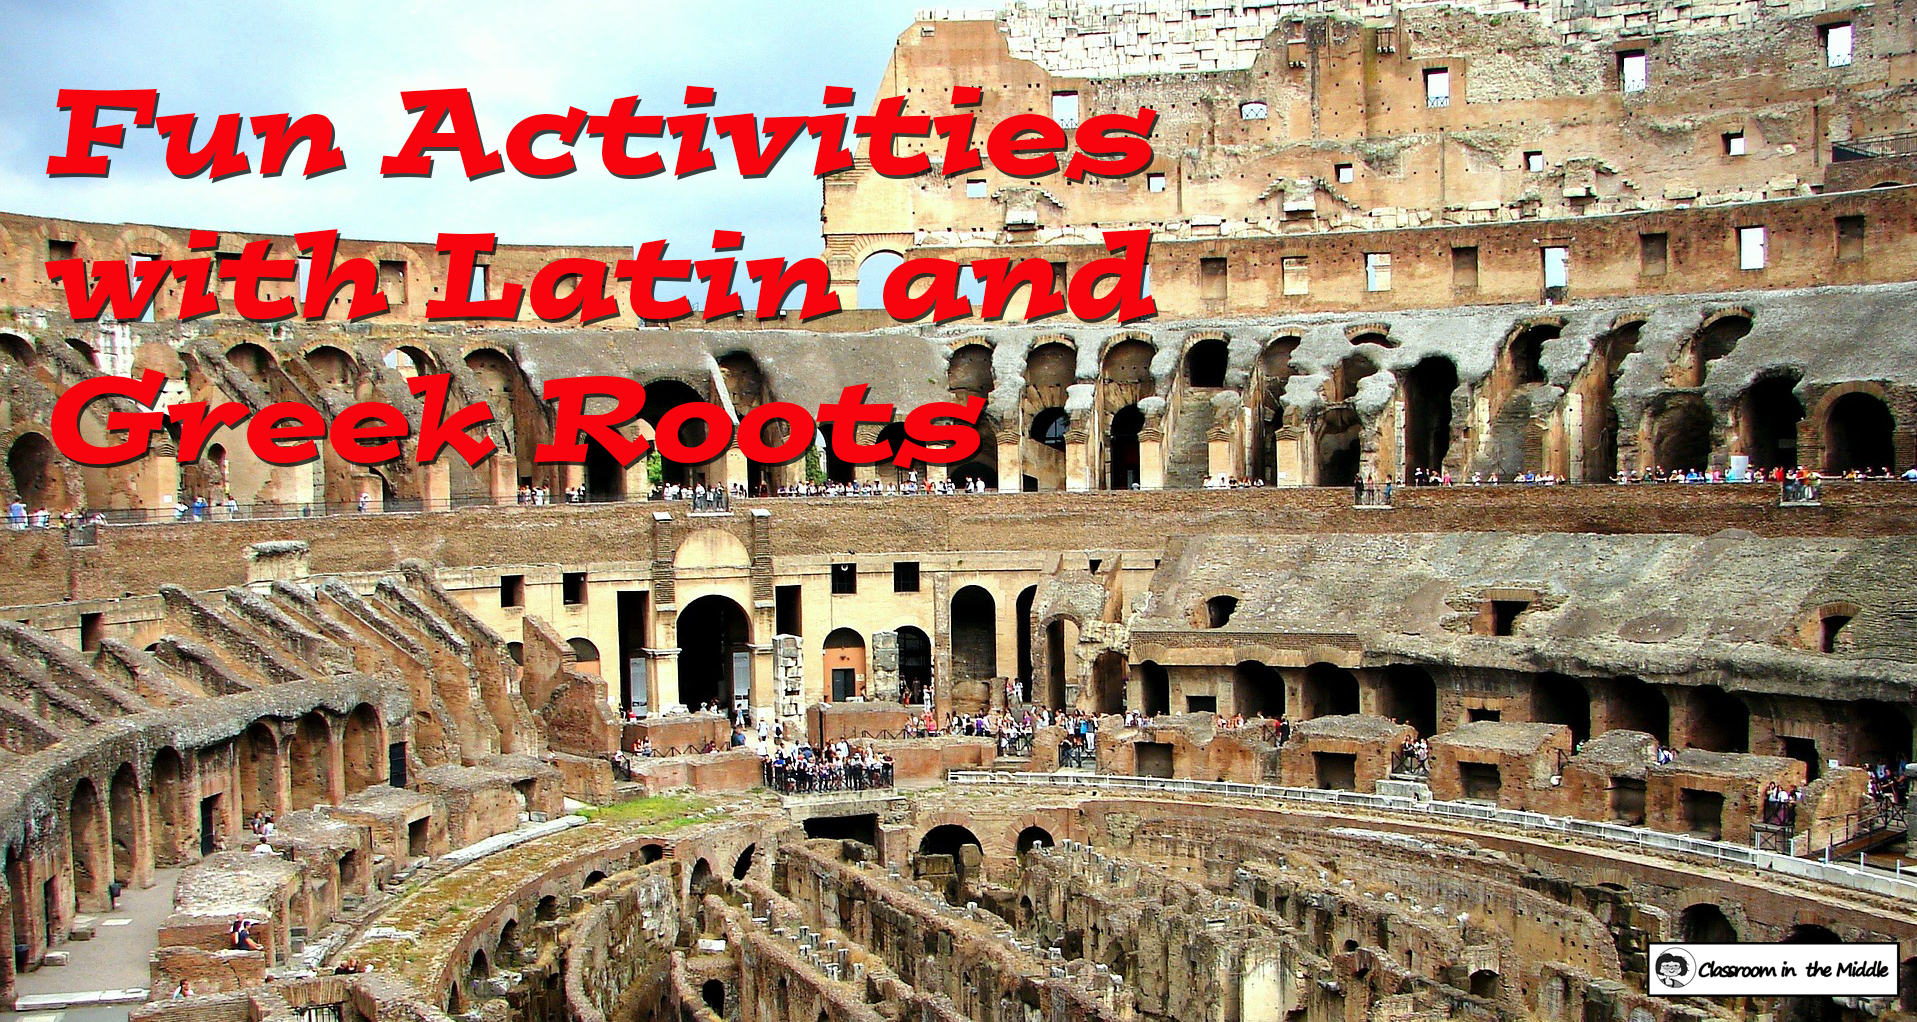 Fun Activities with Latin and Greek Roots